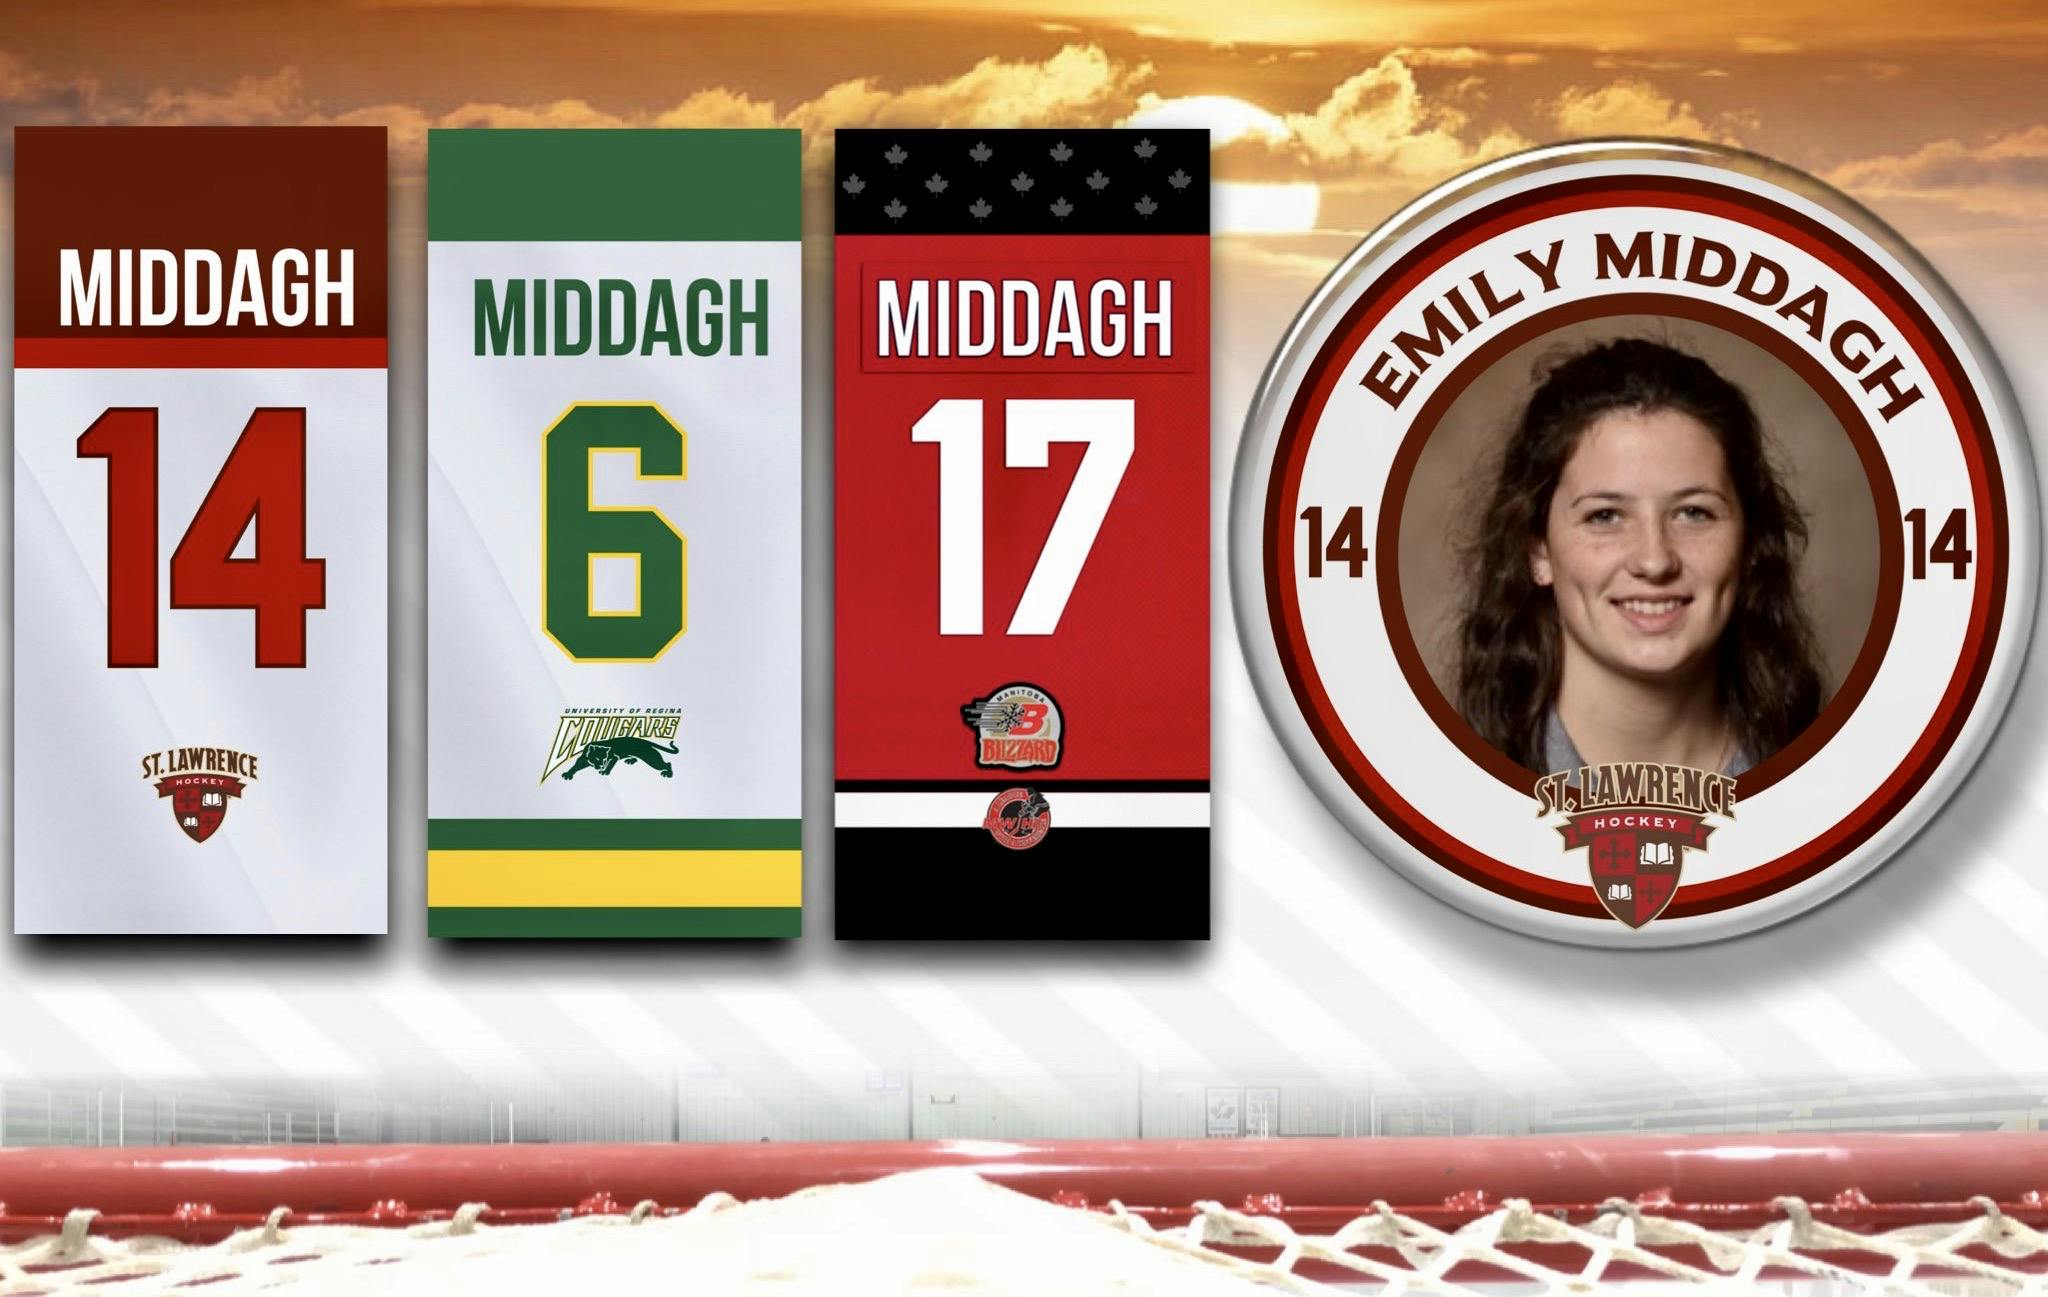 Manitoba Hockey Community Mourns the Loss of Emily Middagh